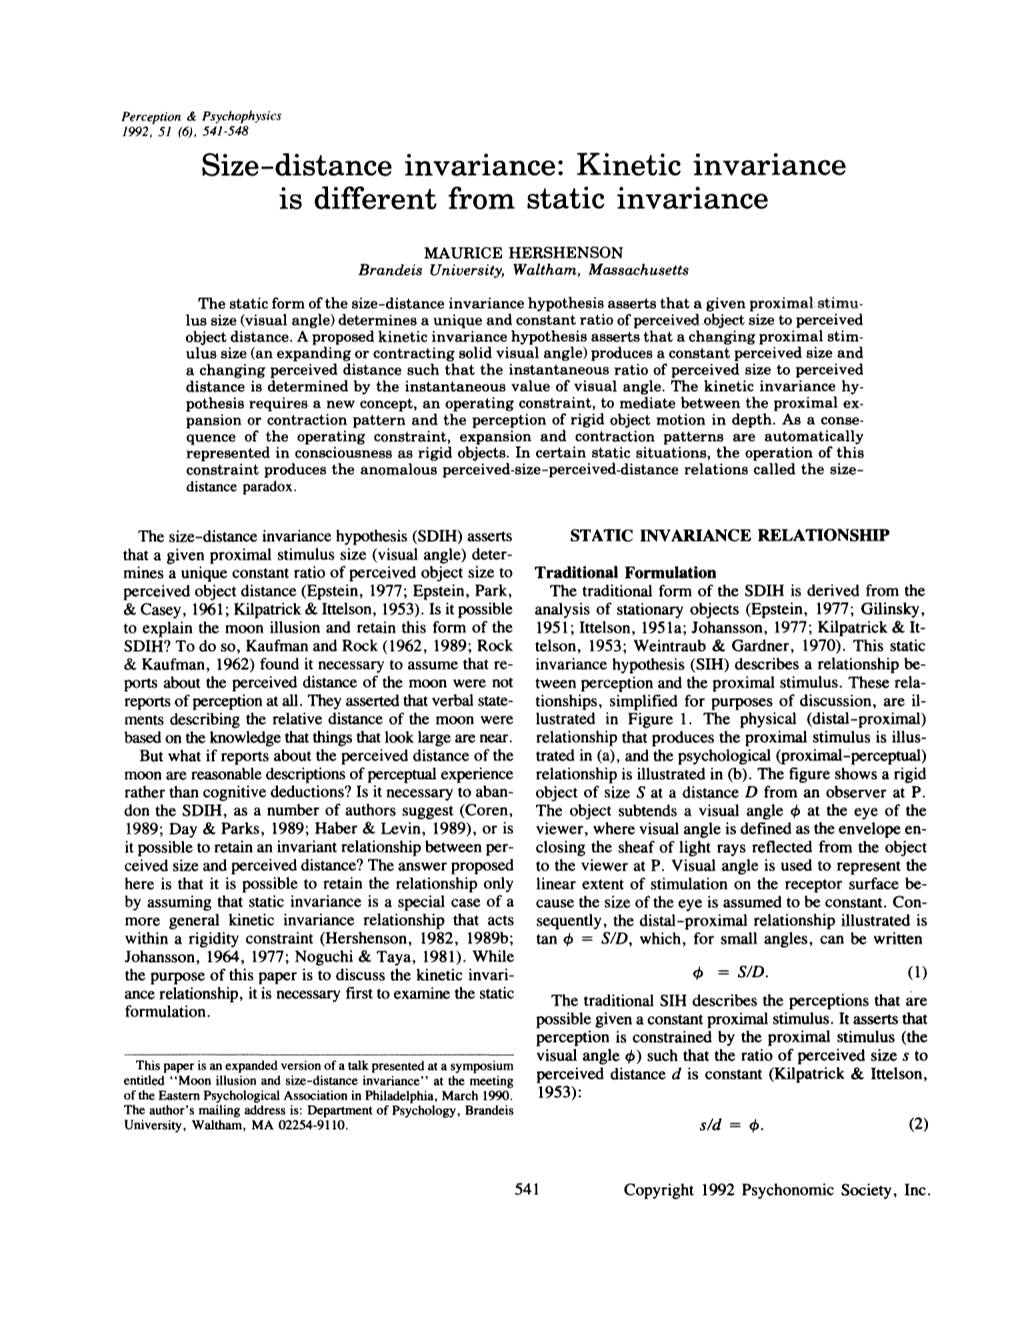 Hershenson (1992) Size-Distance Invariance. Kinetic Invariance Is